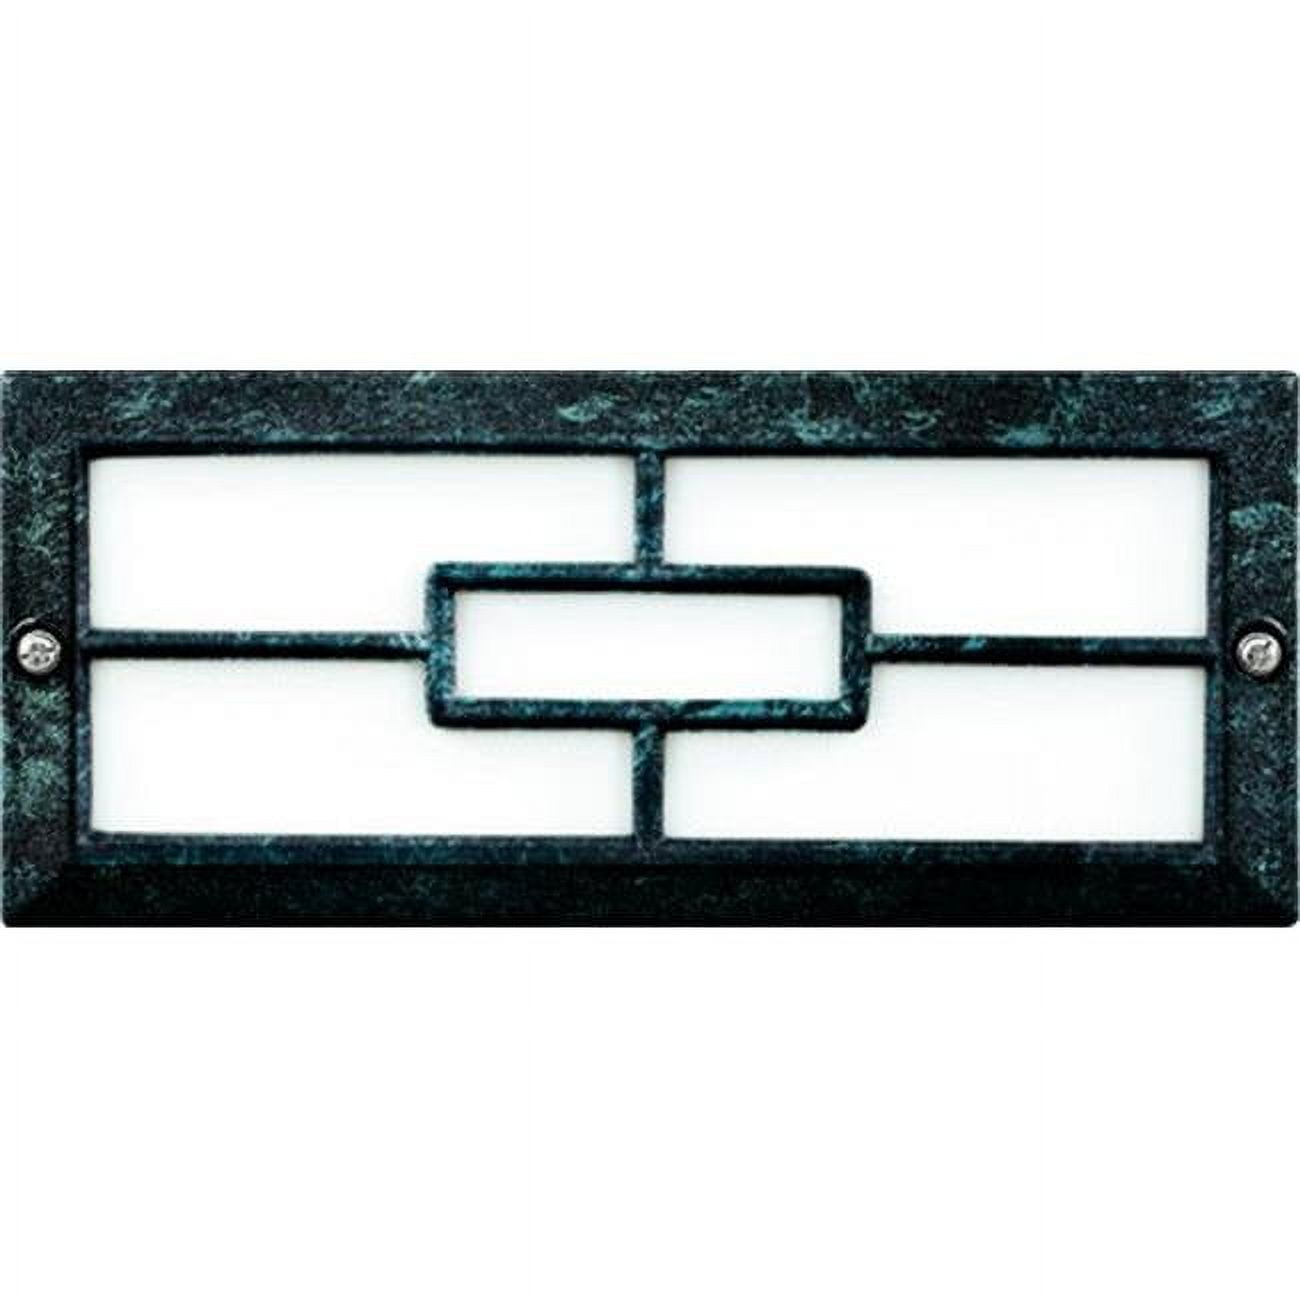 Picture of Dabmar Lighting LV636-VG Cast Aluminum Recessed Brick, Step & Wall Light, Verde Green - 4 x 9.13 x 3.25 in.